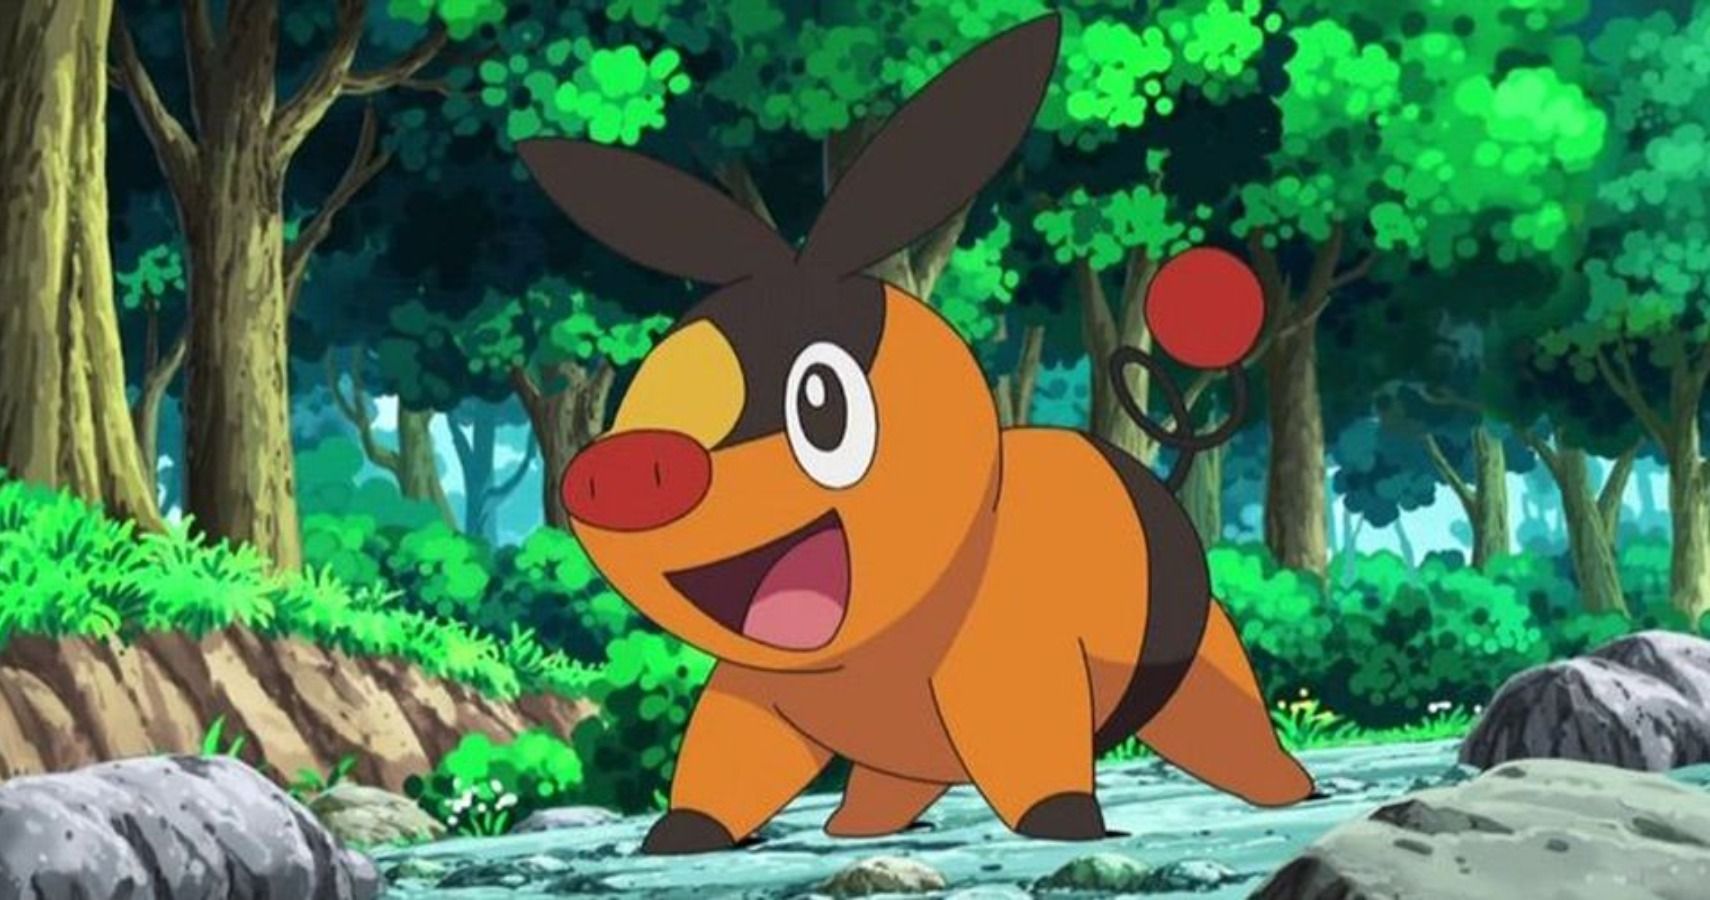 Tepig Represents The Ongoing Trend Of Pokemon Go’s Increasingly Boring Community Days